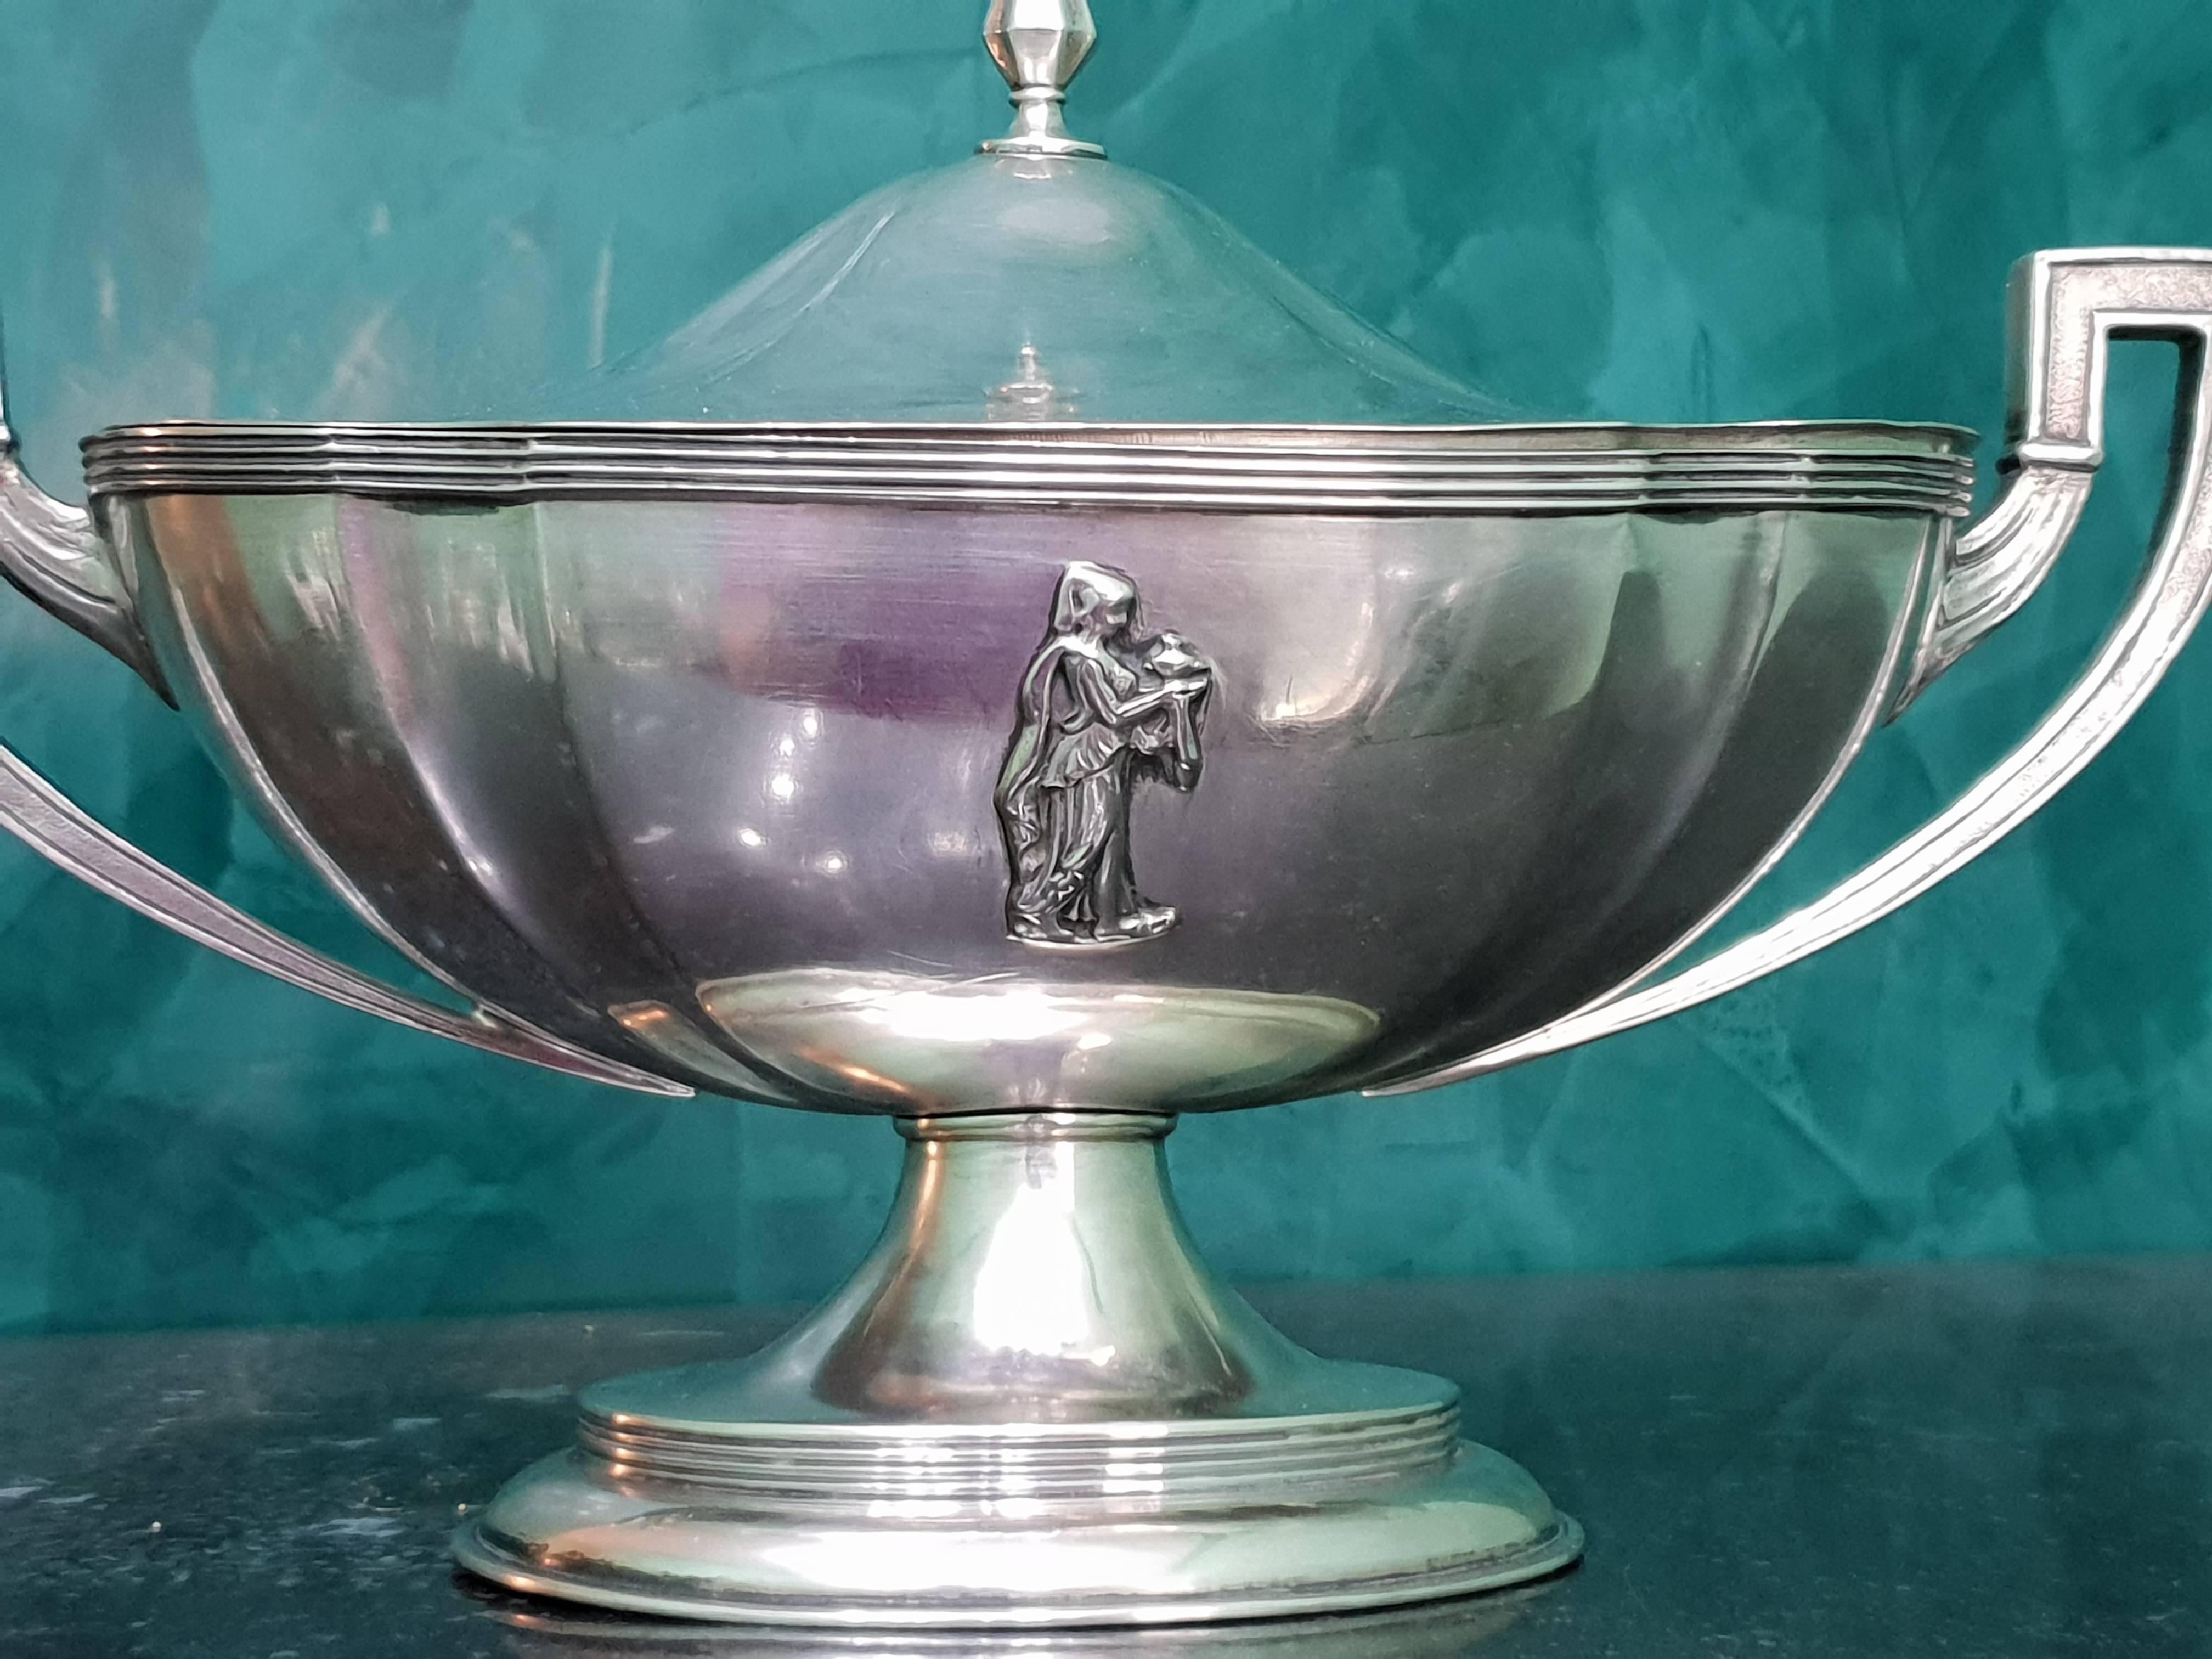 Georg Roth & CO - Hanauer Silber Manufactur - 1891-1906

Gothic Revival soup bowl in silver 800/1000 realized at the end of XIX century from Georg Roth in the independent city of Hanau. 

The soup bowl imitates the old gothic German style of 15